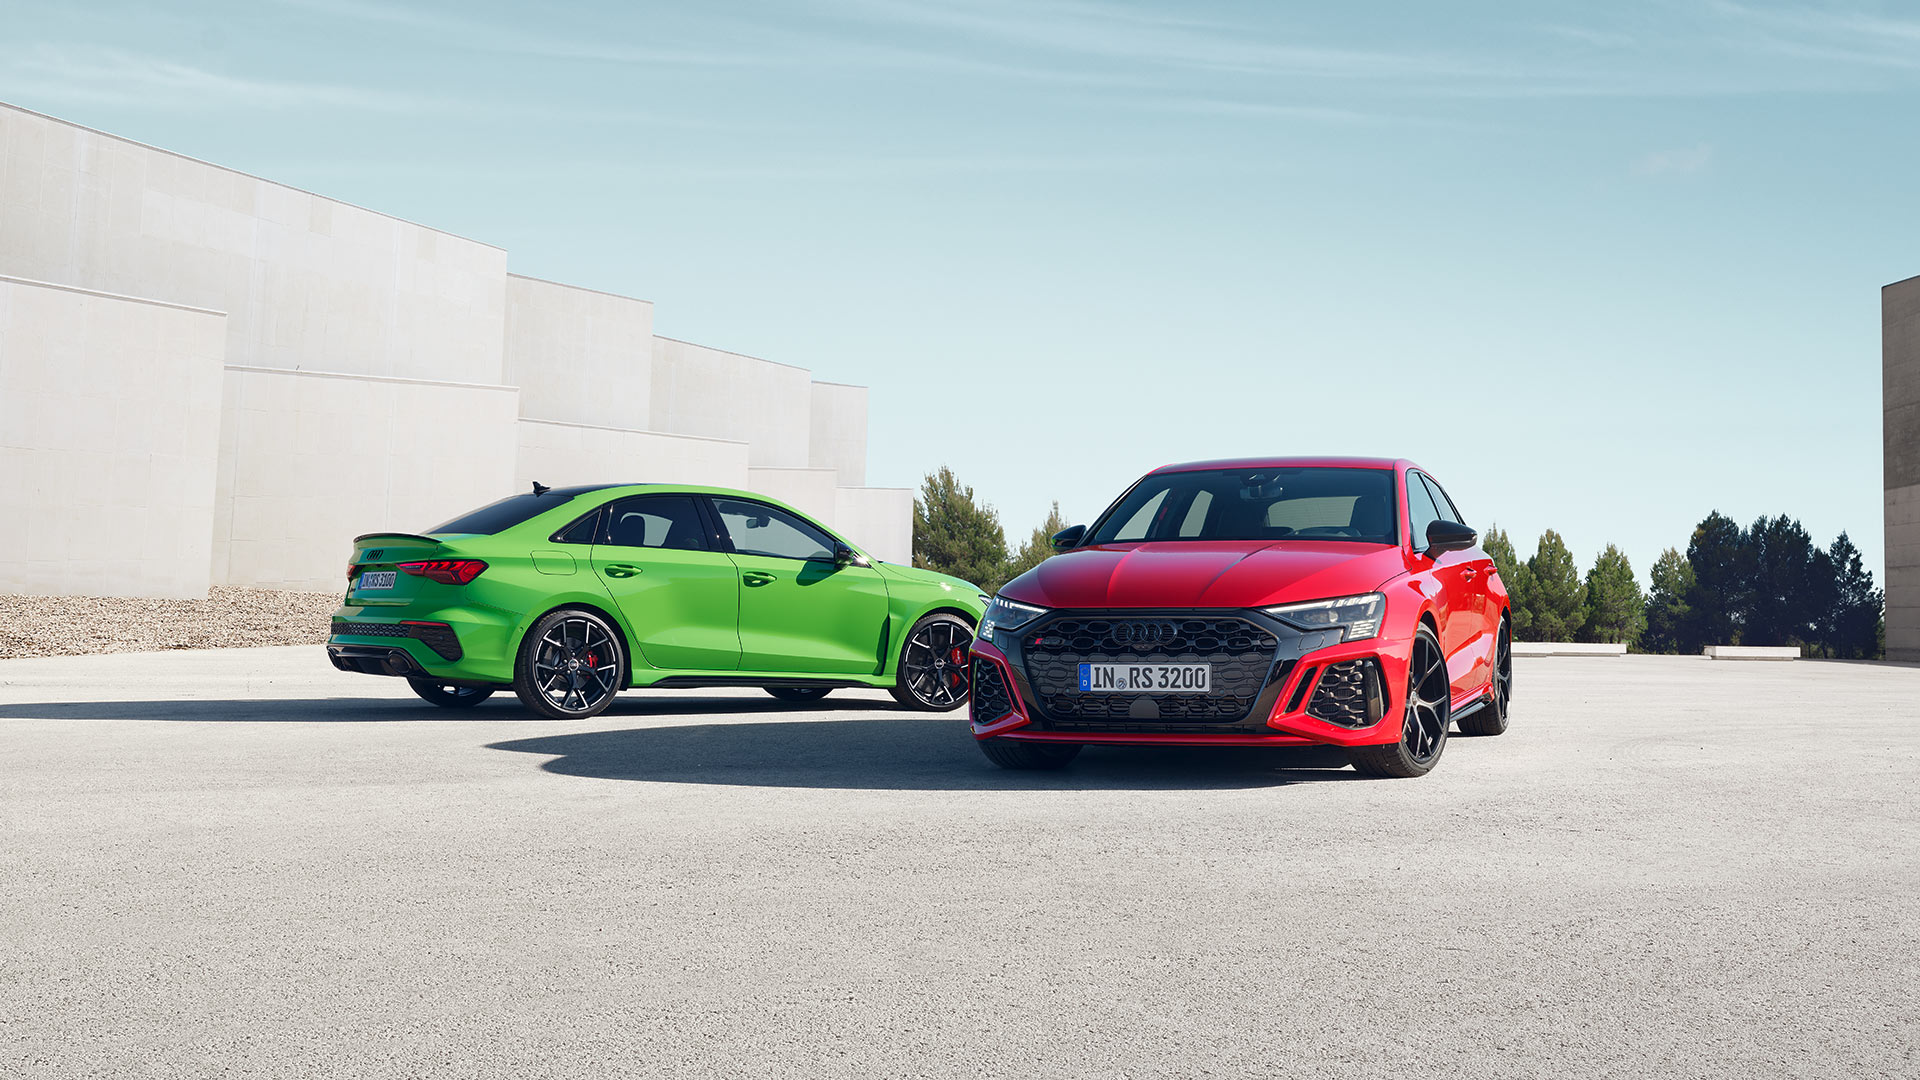 Two Audi RS3's